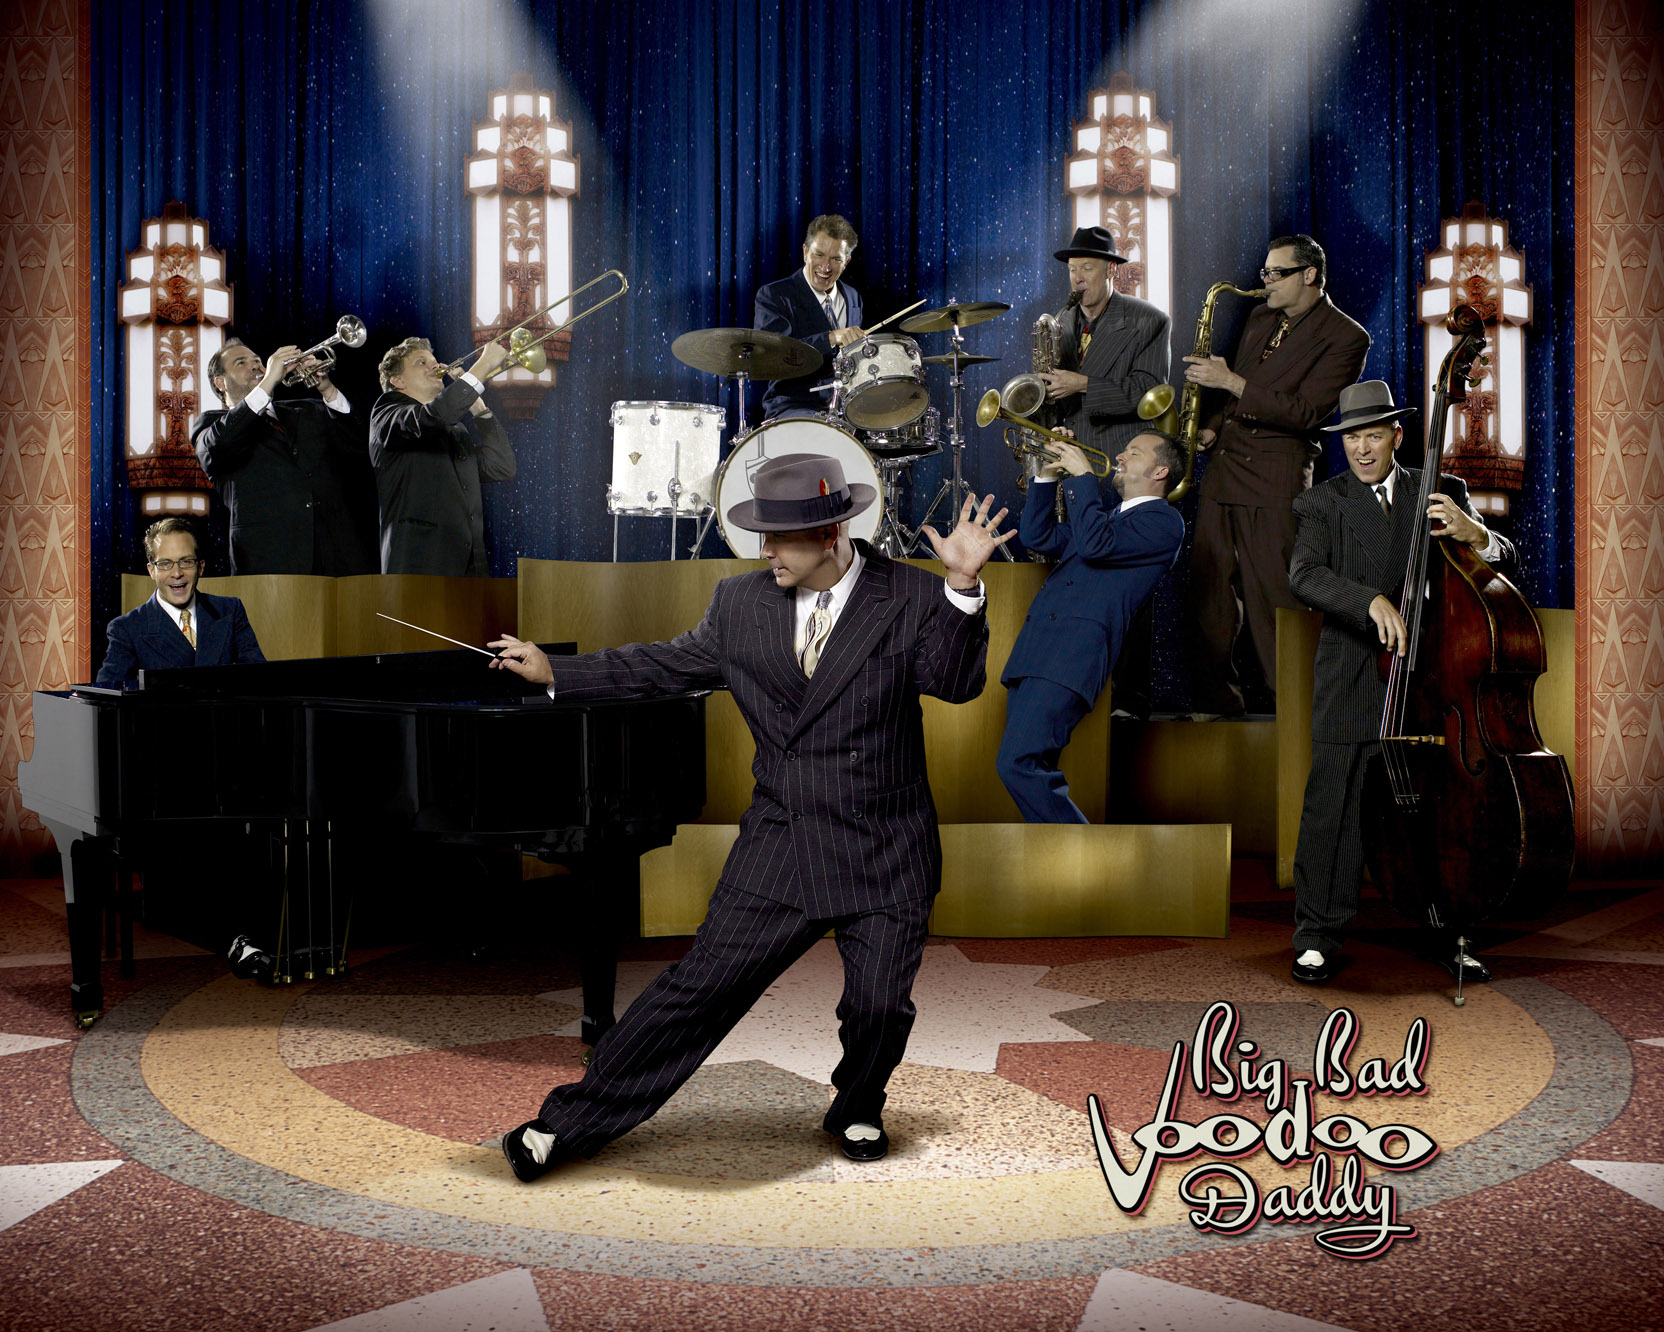 An Evening with Big Bad Voodoo Daddy